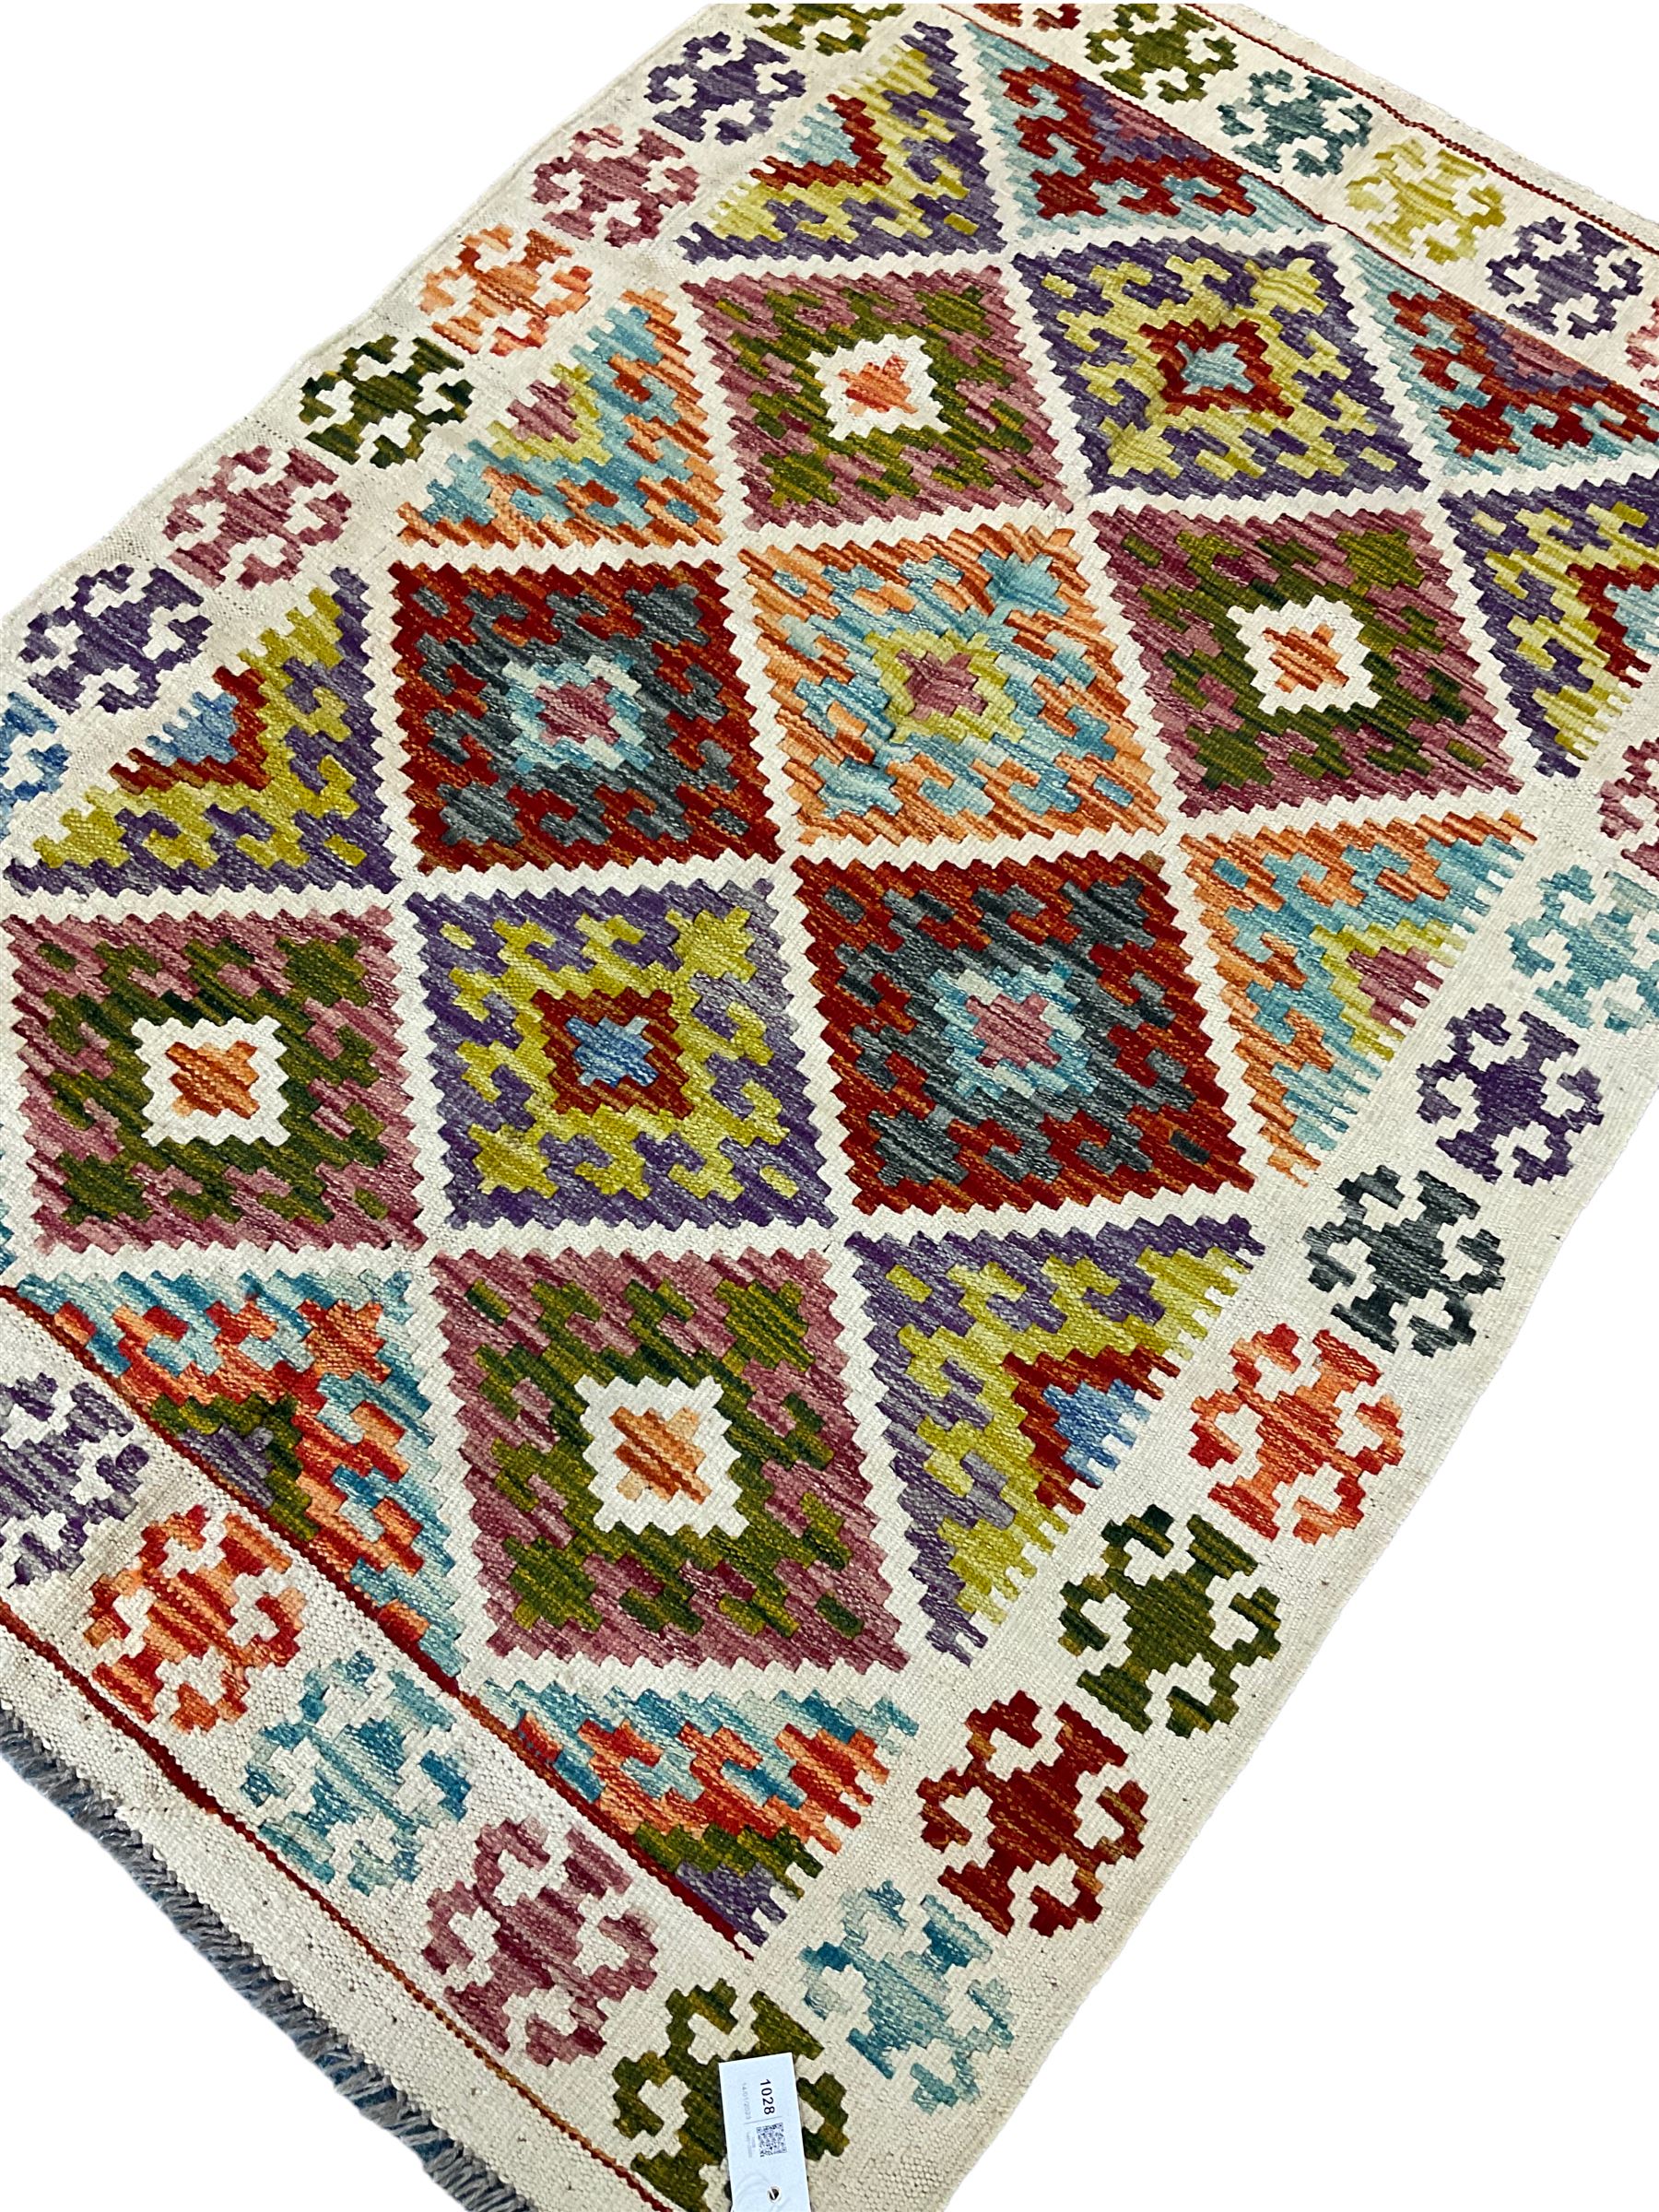 Chobi Kilim ivory and multi-colour rug decorated with stepped geometric lozenges and repeating borde - Image 2 of 3